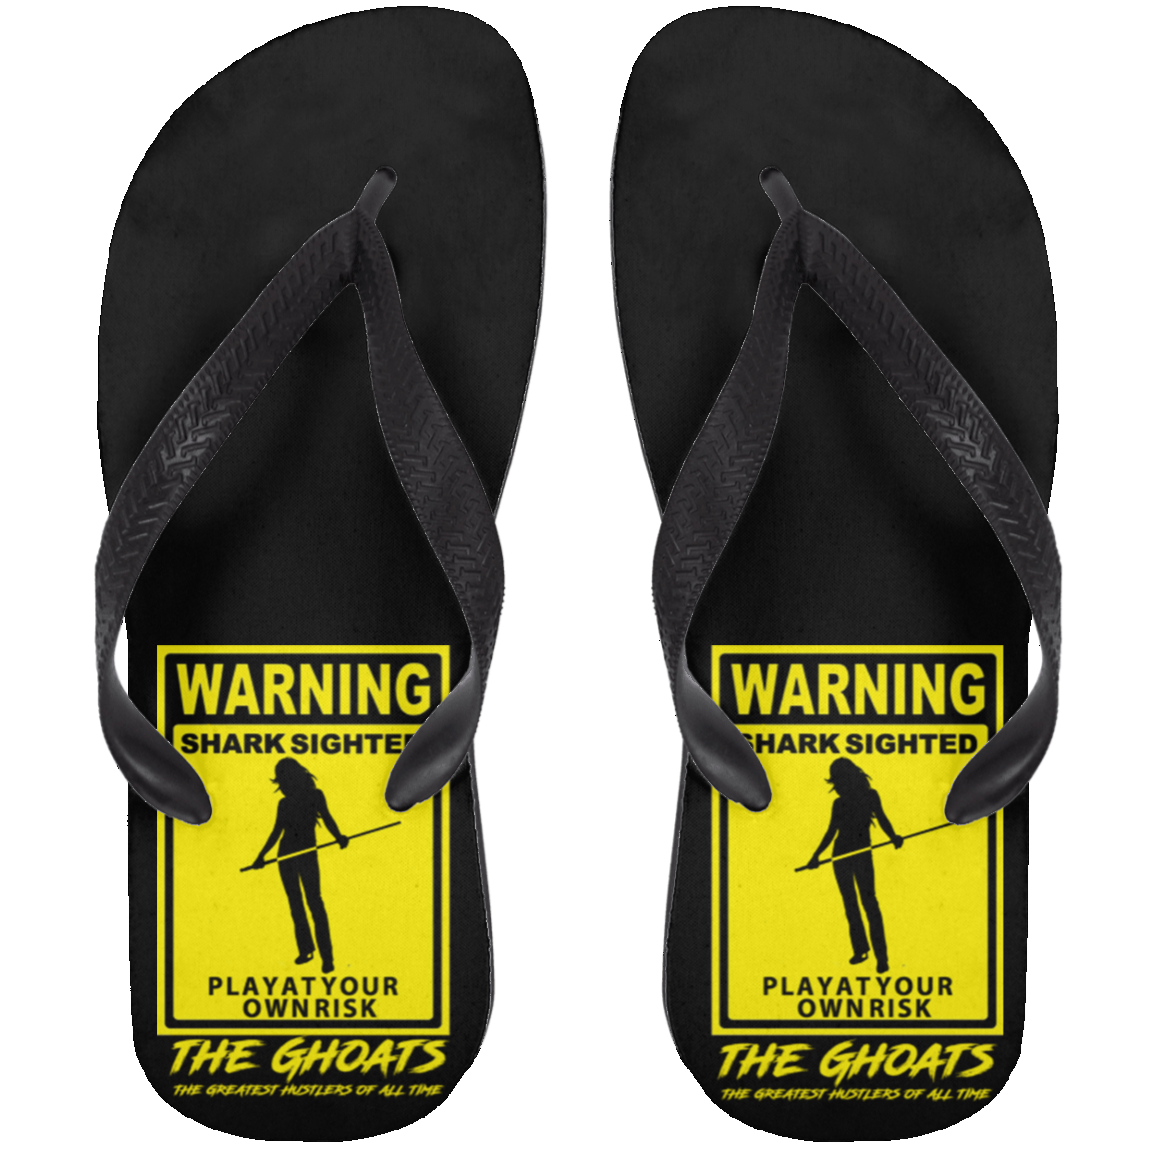 The GHOATS Custom Design. #34 Beware of Sharks. Play at Your Own Risk. (Ladies only version). Adult Flip Flops